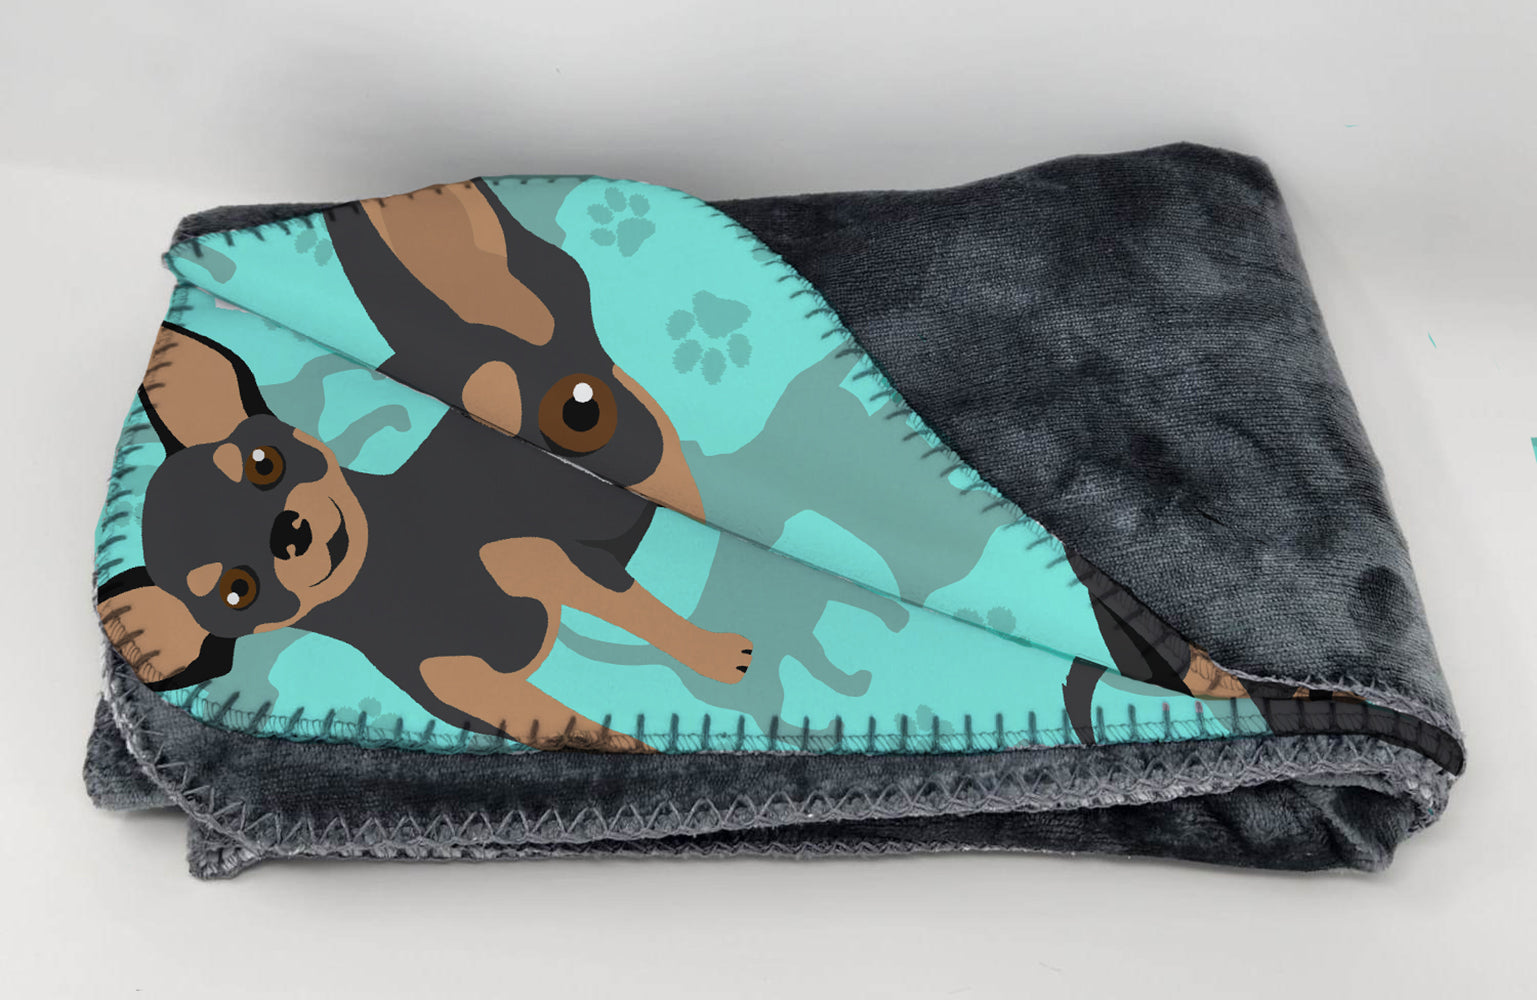 Buy this Black and Tan Chihuahua Soft Travel Blanket with Bag